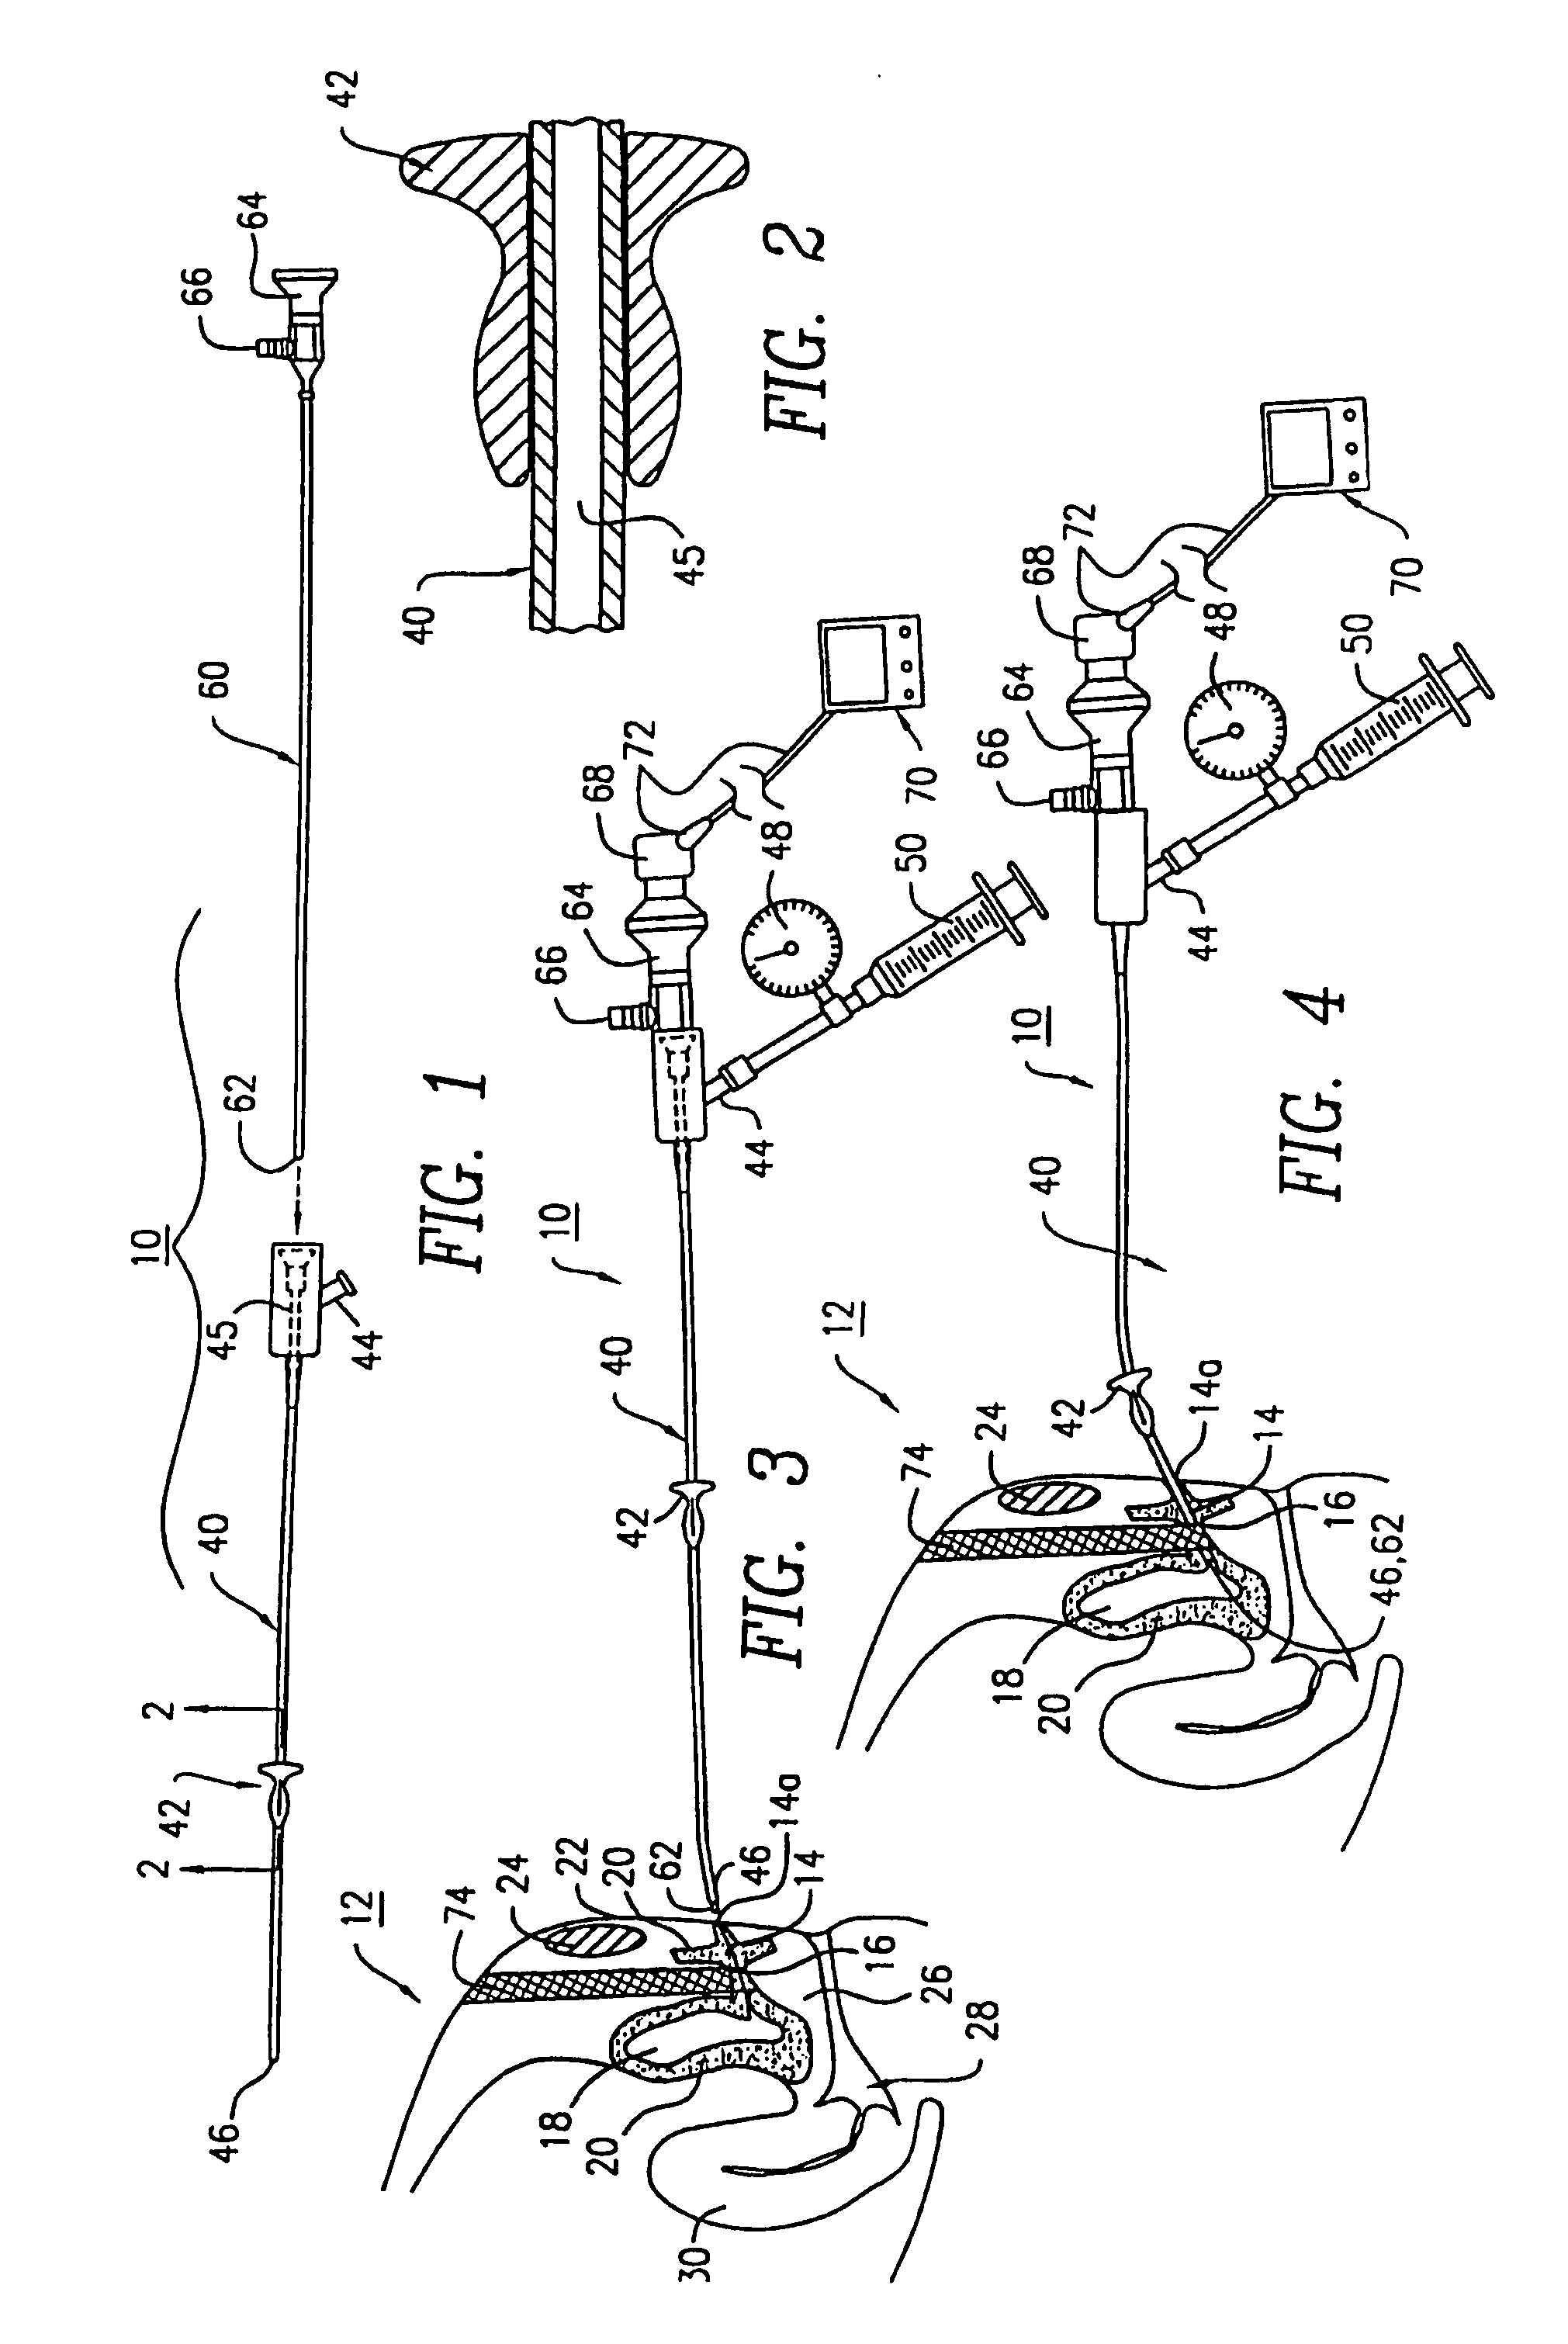 Apparatus and method for the measurement of the resistance of the urethral sphincter